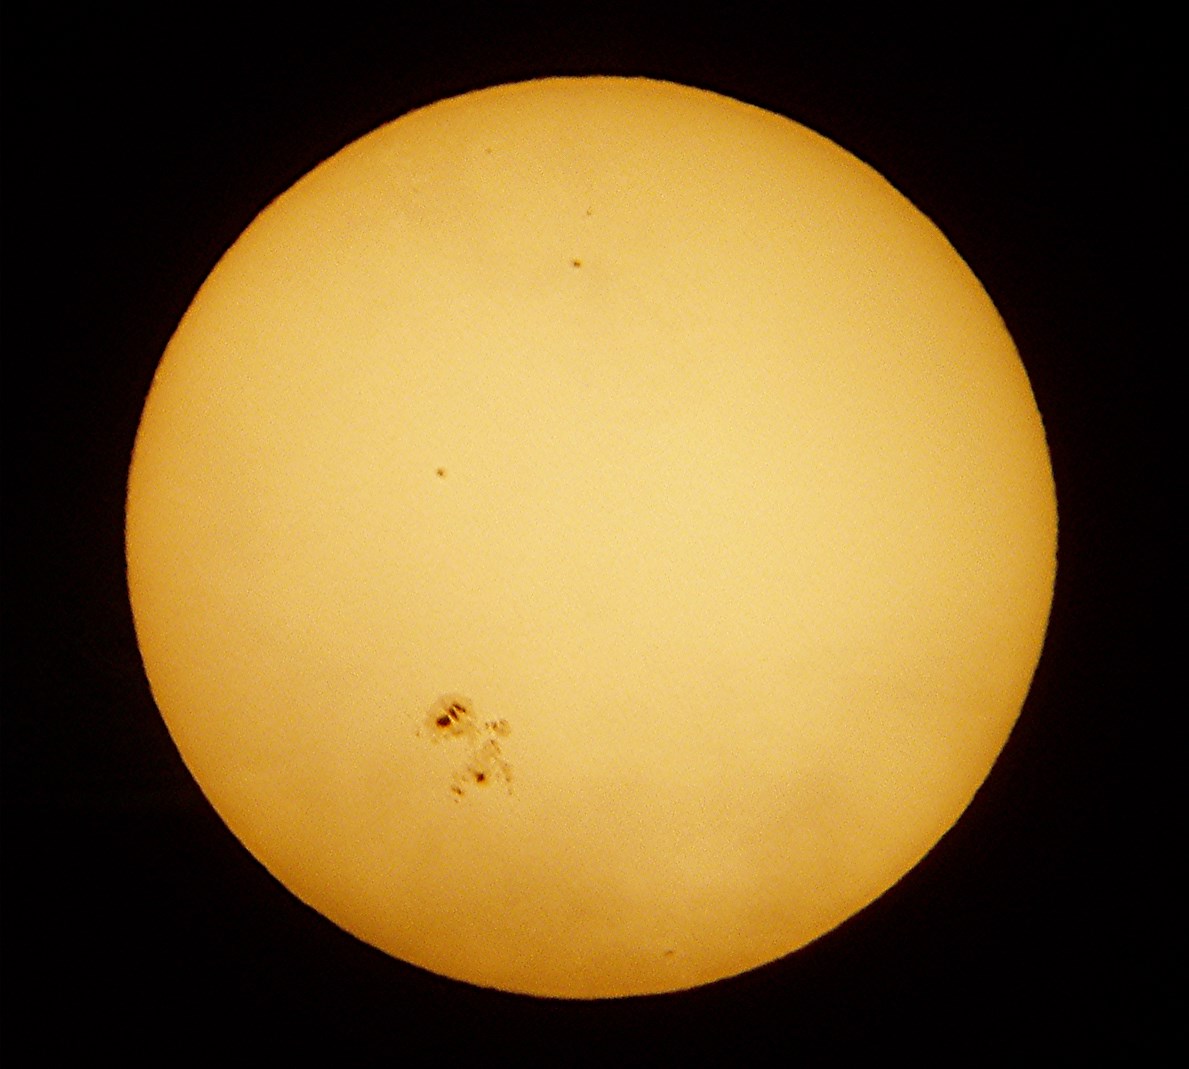 Sunspot Group AR 12192 of October 25, 2014. It was the largest sunspot in 24 years. Olympus Digital Camera. Photo Credit Dan Pedan